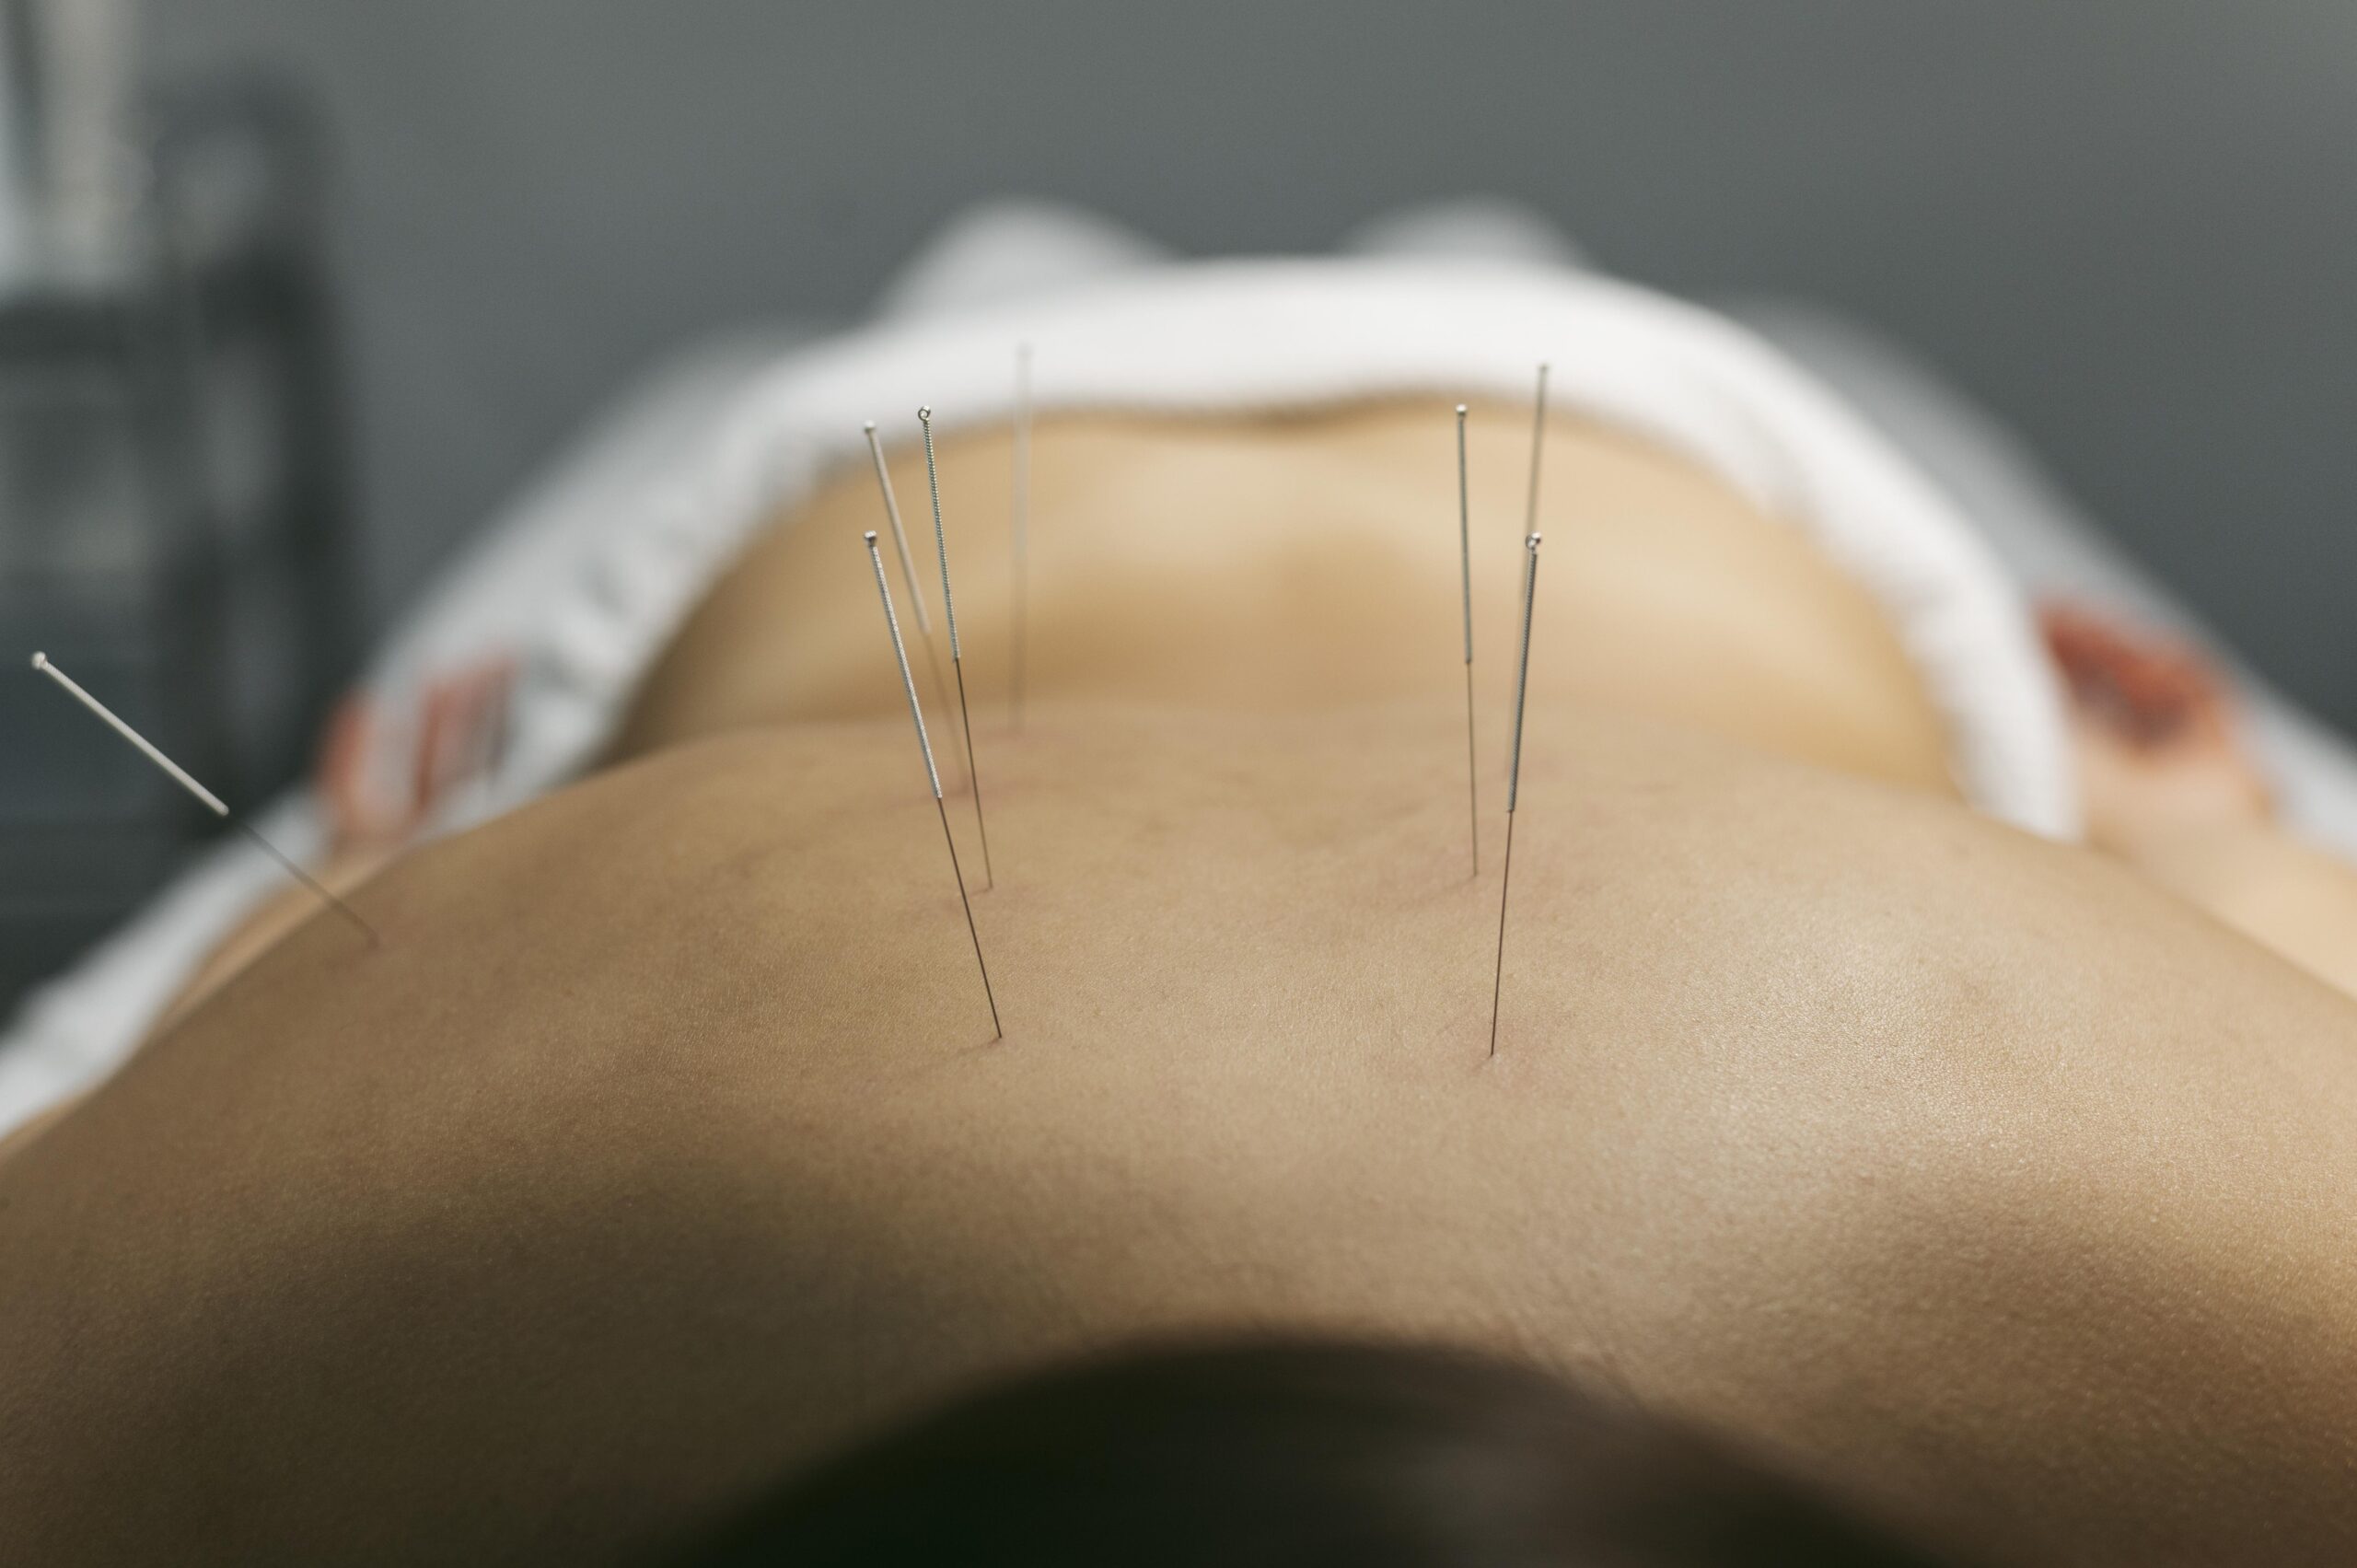 USING ACUPUNCTURE FOR CHRONIC LOWER BACK PAIN MANAGEMENT